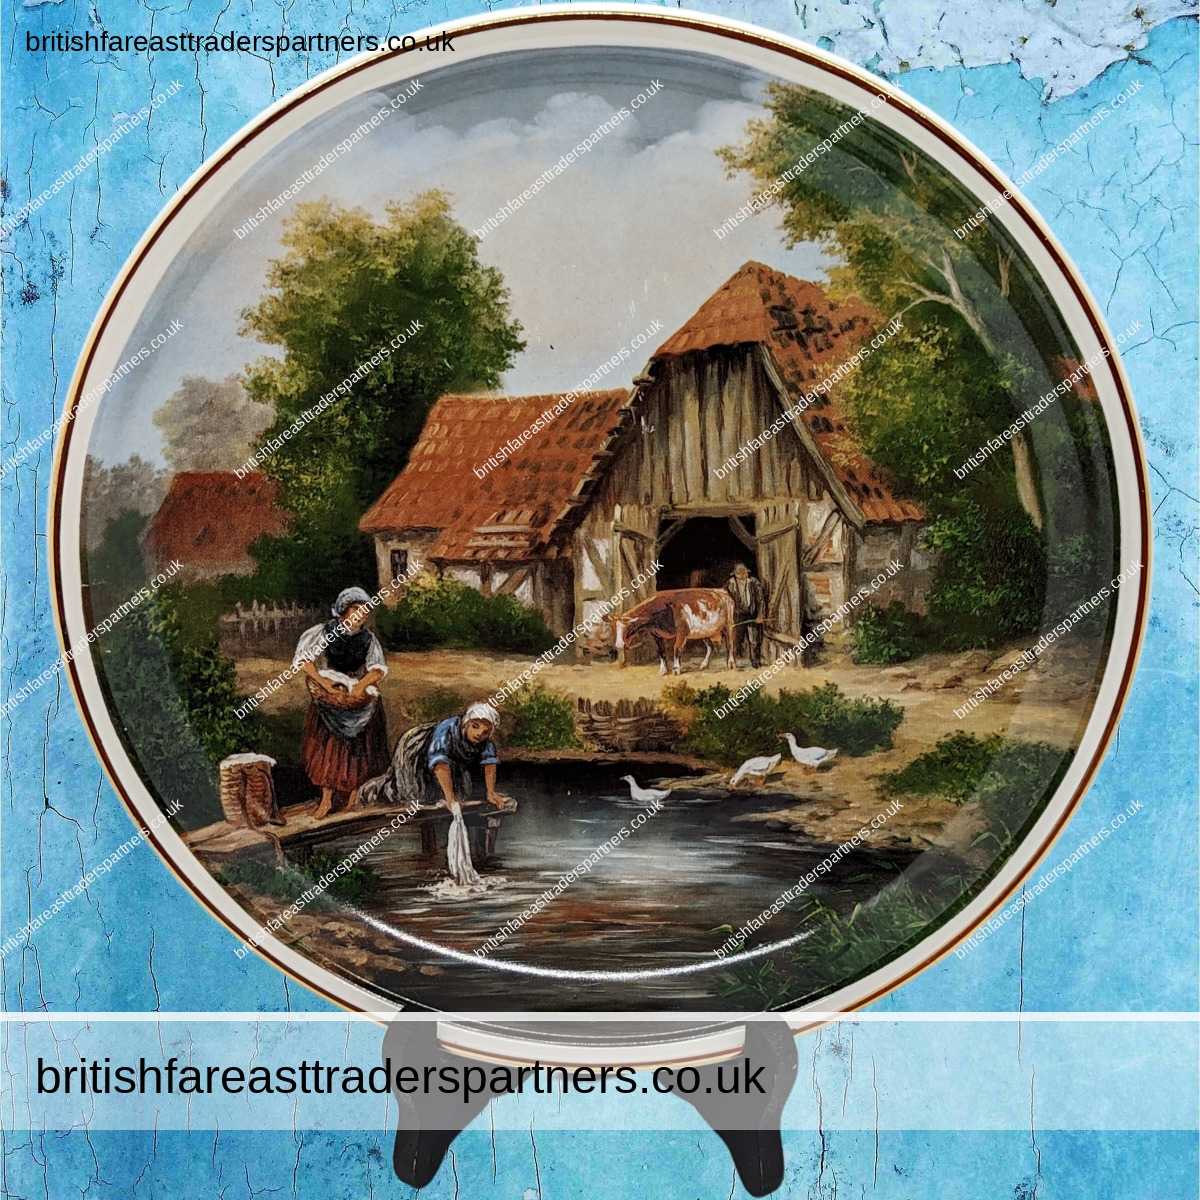 VINTAGE ENGLISH COLLECTOR’S PLATE “VILLAGE LIFE” “WASHING DAY” PAINTED BY ELIZABETH PAETZ- KALICH VINTAGE | COLLECTABLES | DECORATIVE PLATES | ENGLISH / ENGLAND  | PORCELAIN |  UNITED KINGDOM |  LIFESTYLE | HERITAGE | CULTURE